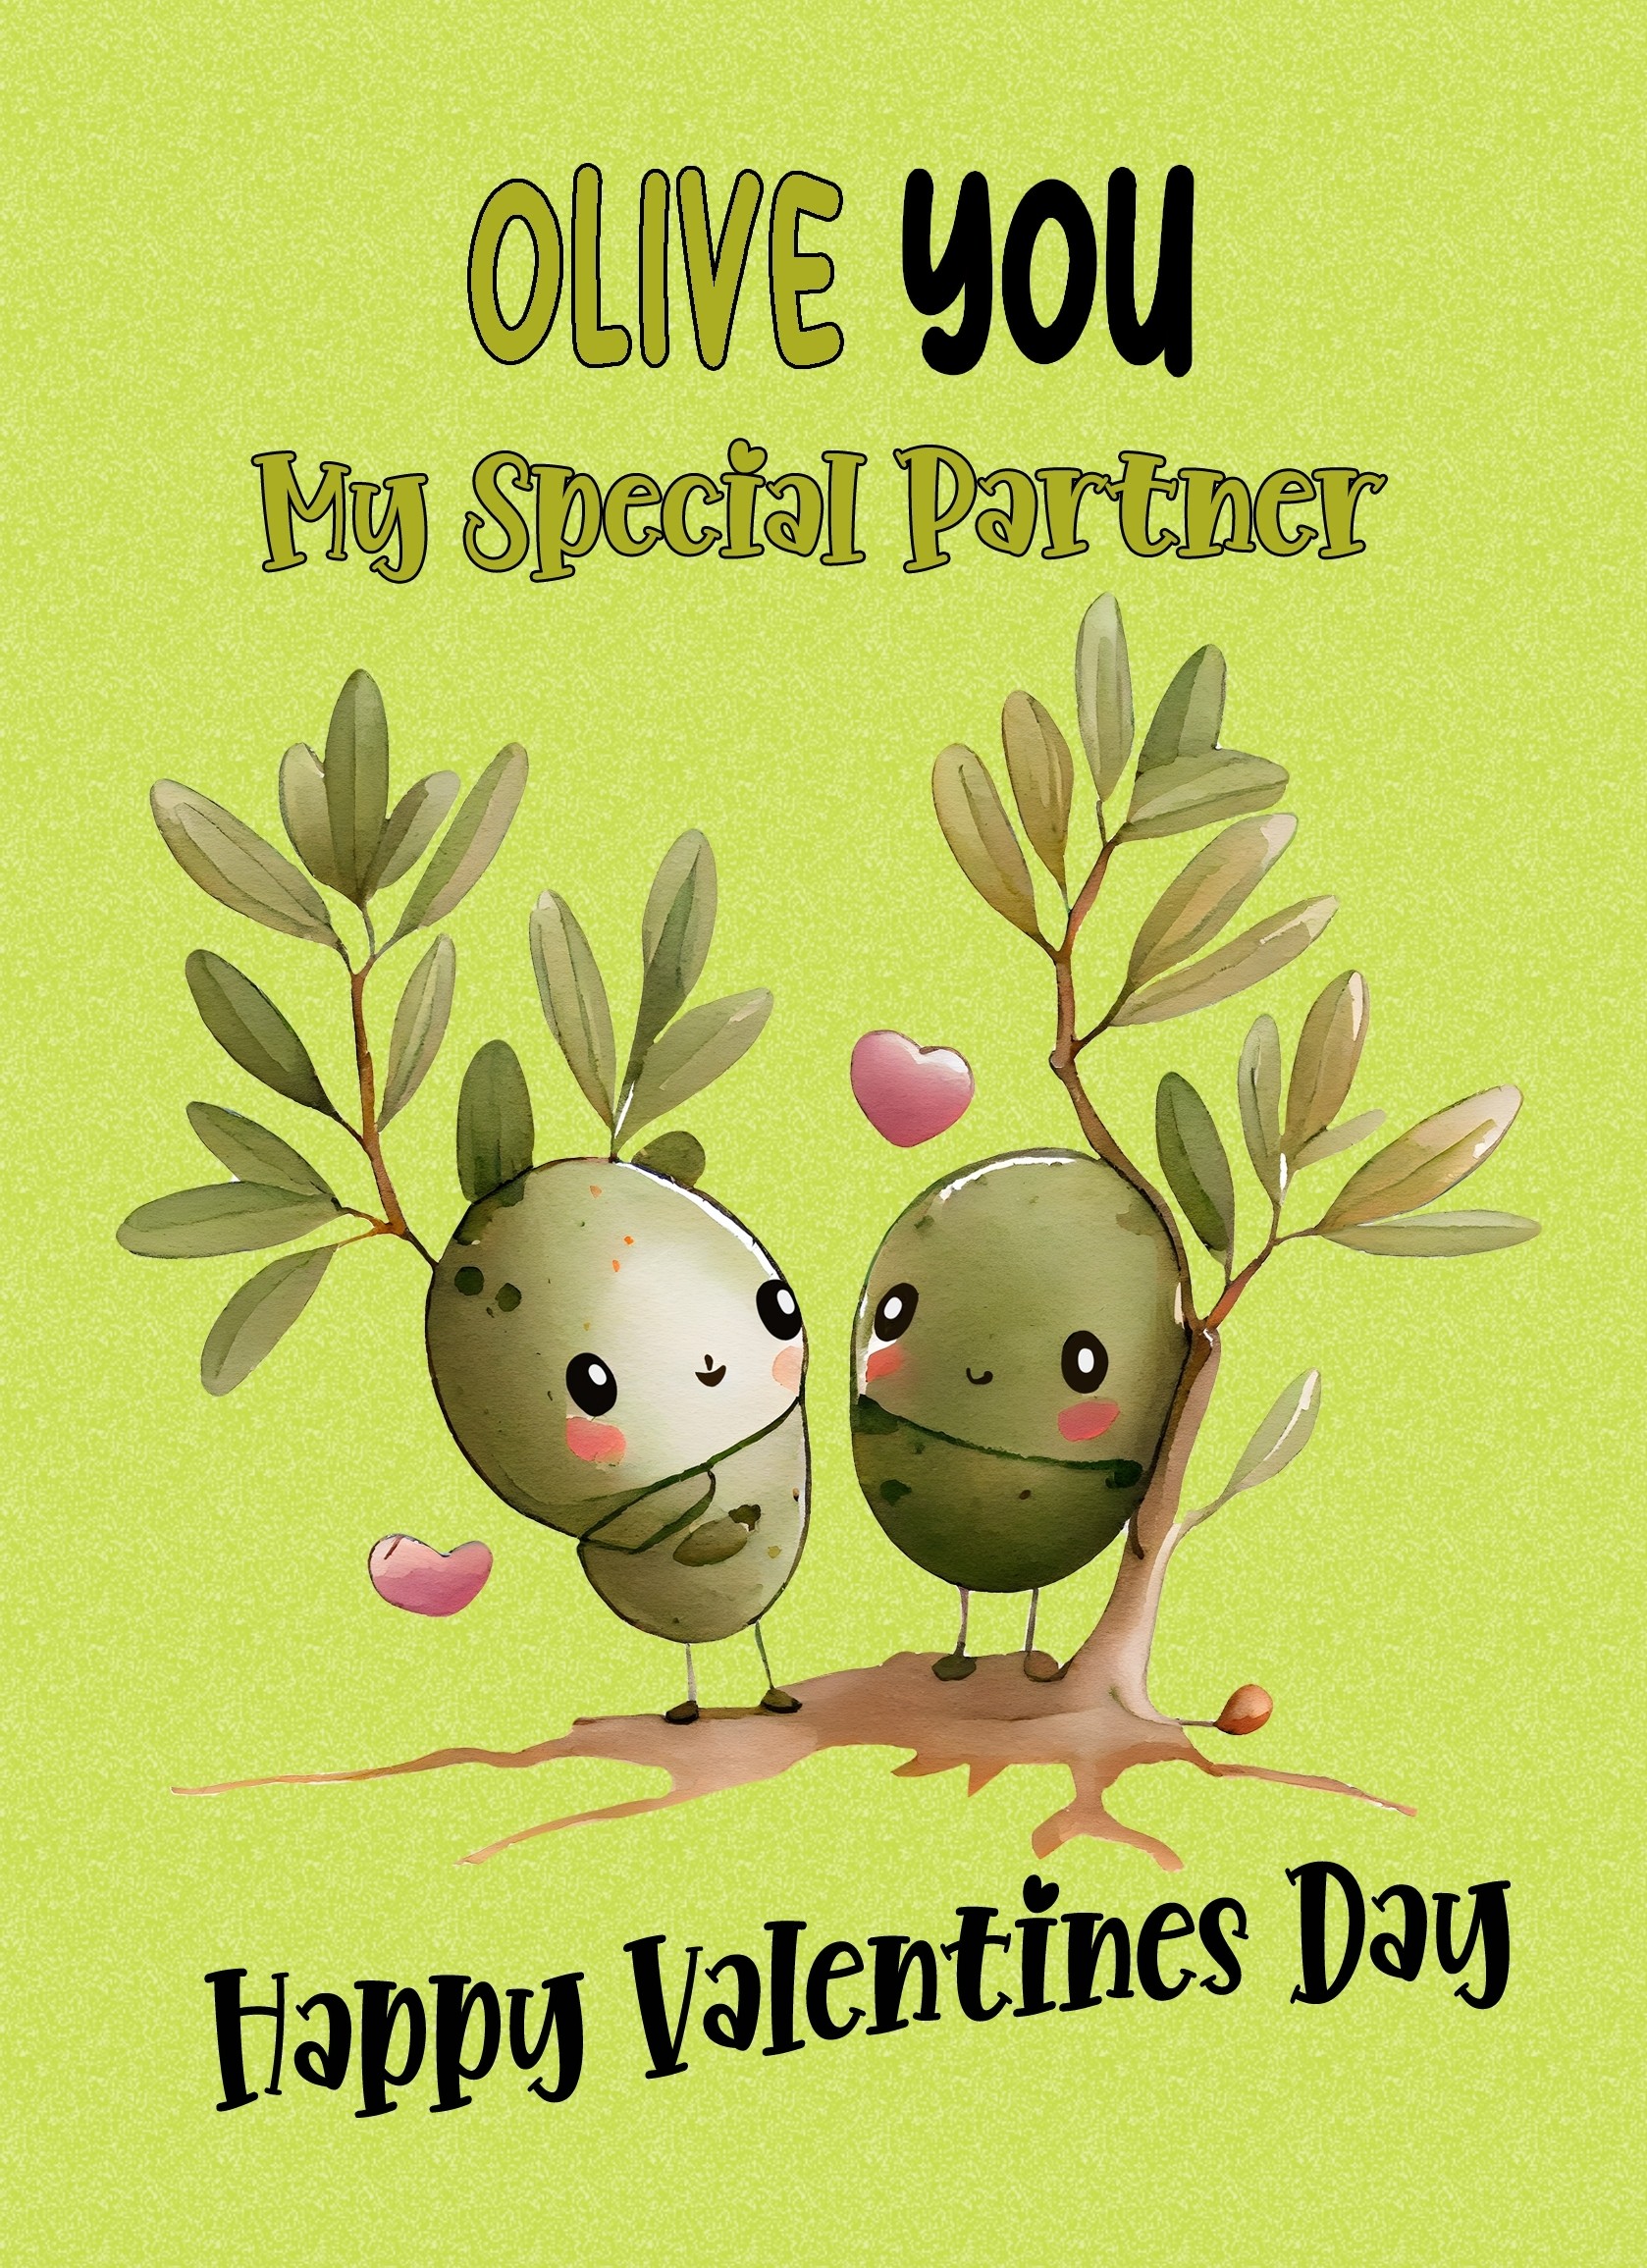 Funny Pun Valentines Day Card for Partner (Olive You)